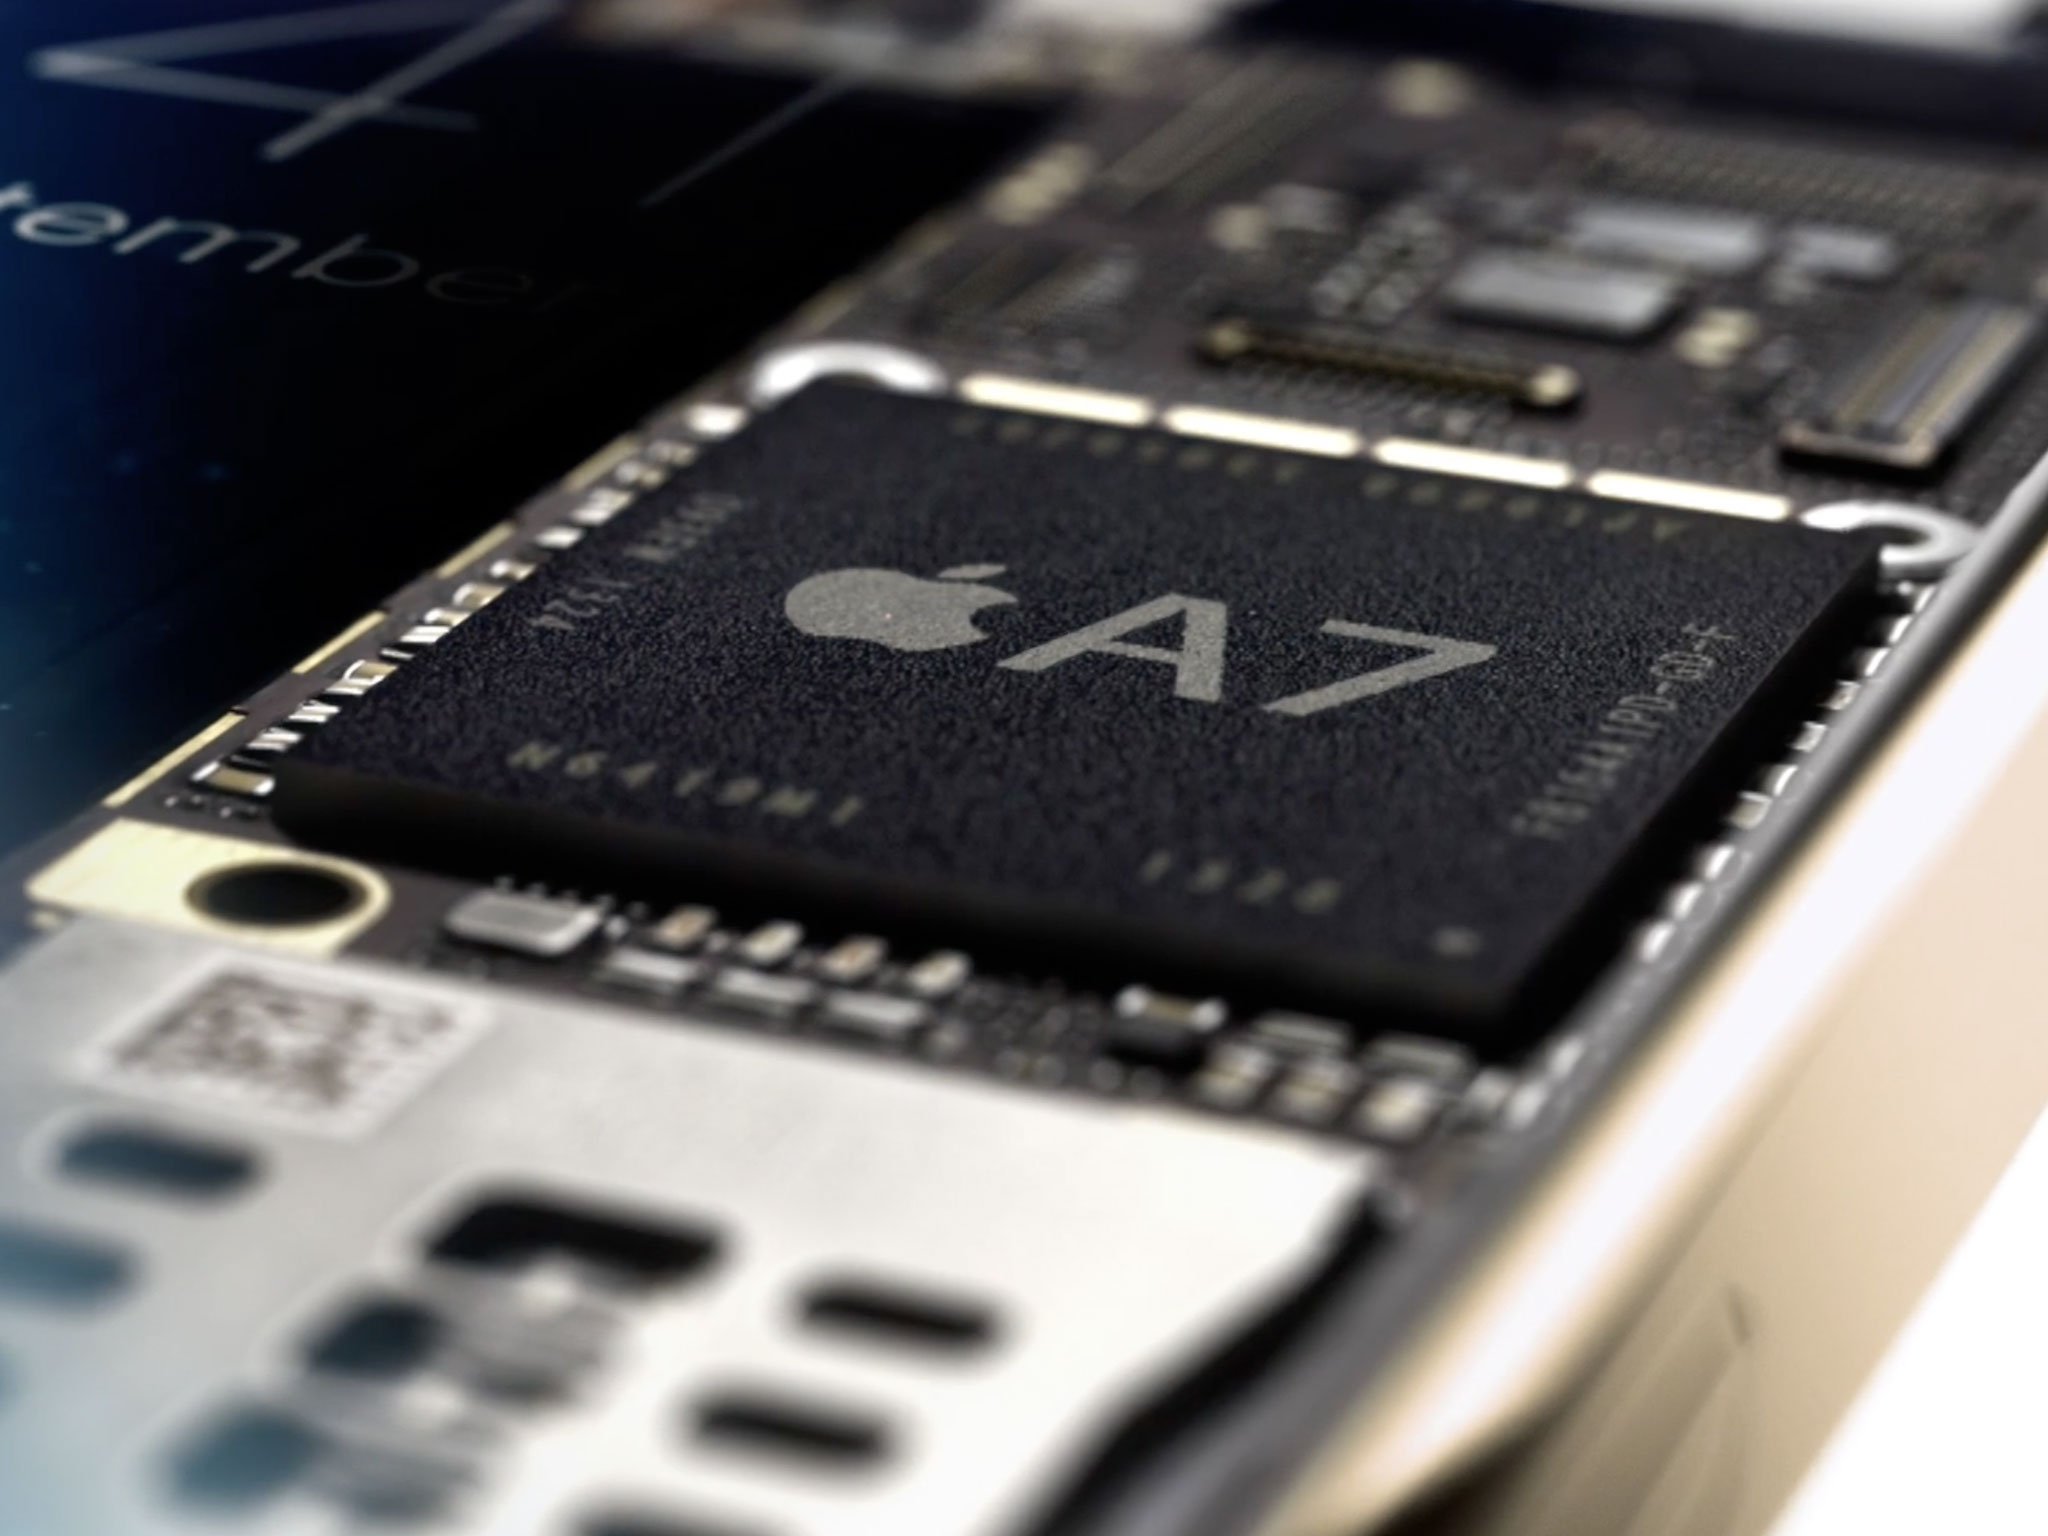 Apple A7 chipset brings 64-bit, twice the speed, OpenGL ES 3.0 gaming